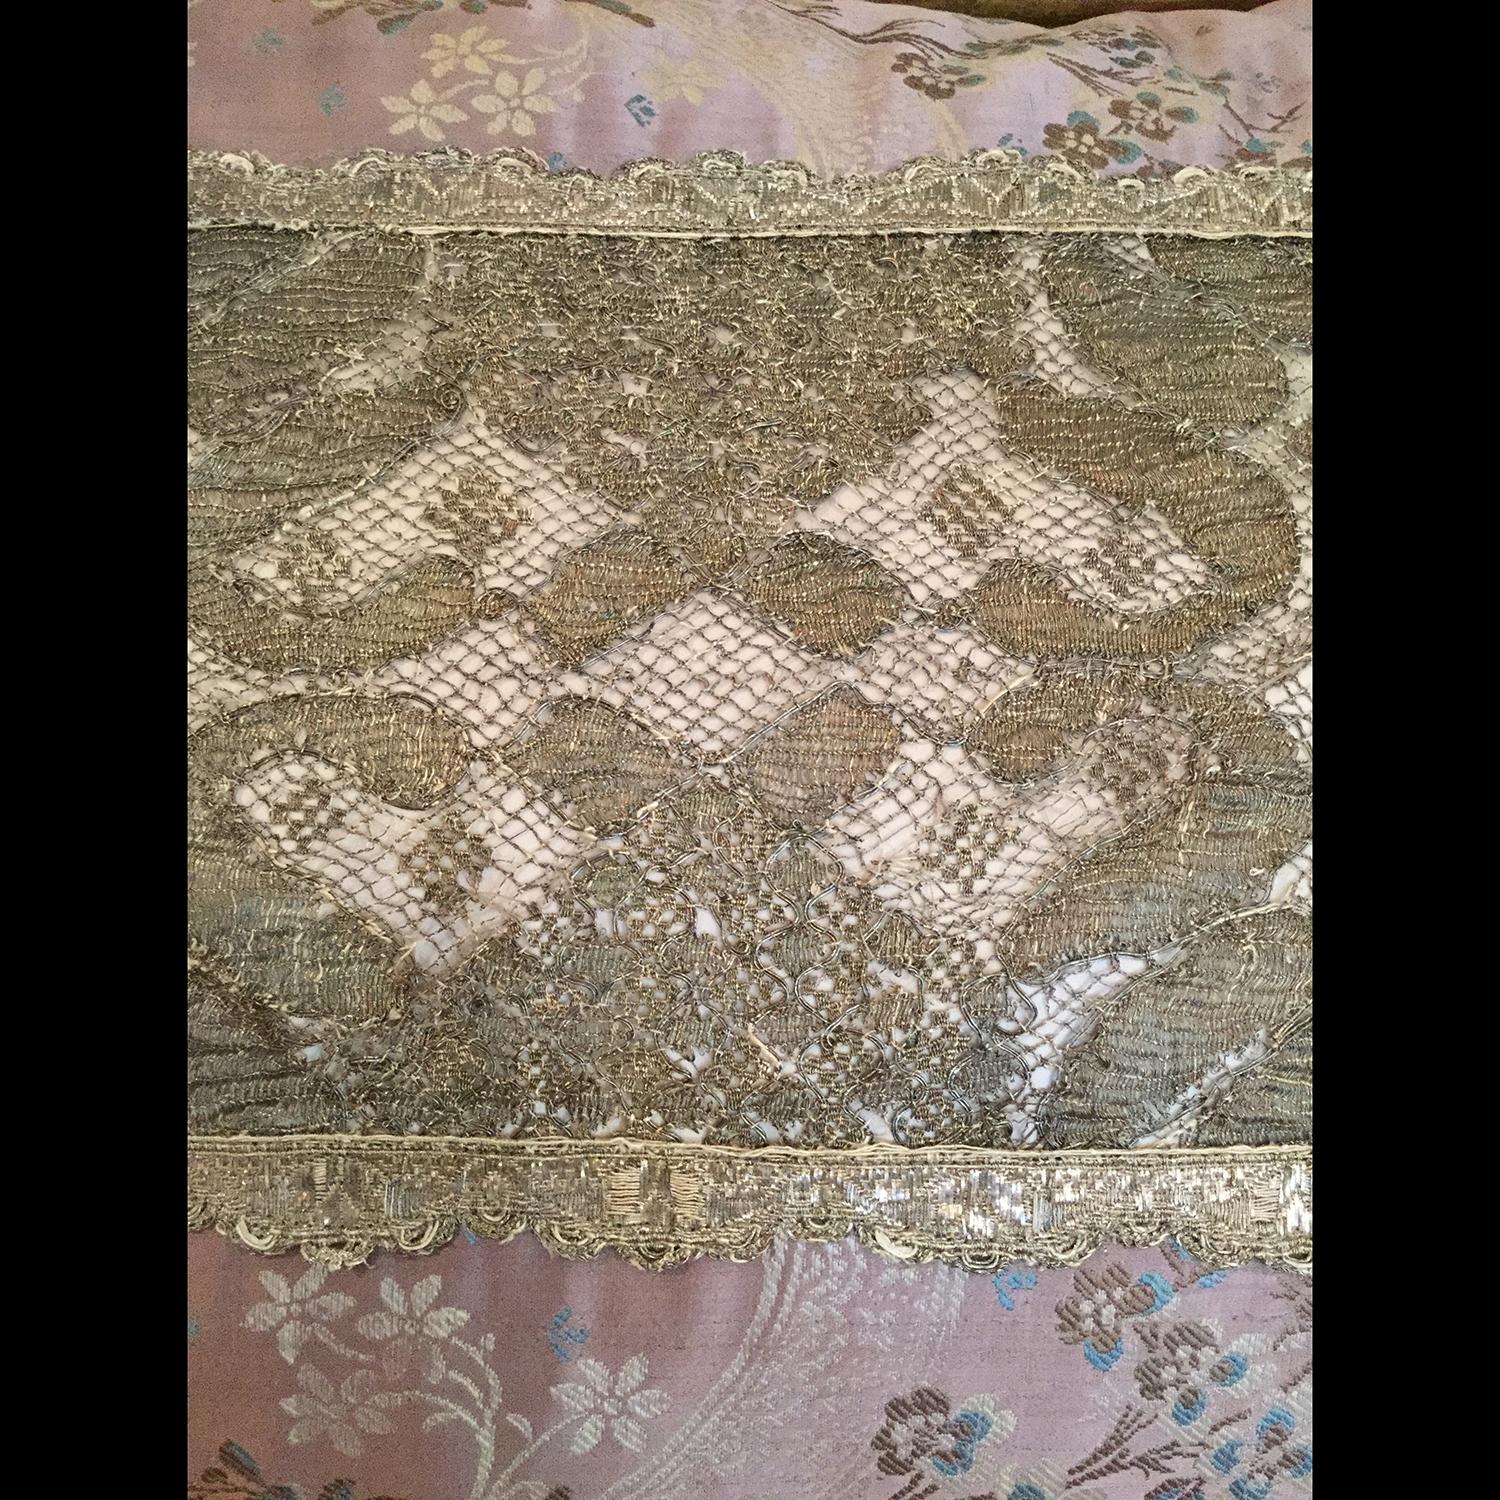 18th century, Italian purple silk lampas with ivory and light blue flowers frames a central panel of rare 18th century, French needle lace bordered by scalloped 18th century Italian silver trim. Italian ivory silk completes the back. Down filled.